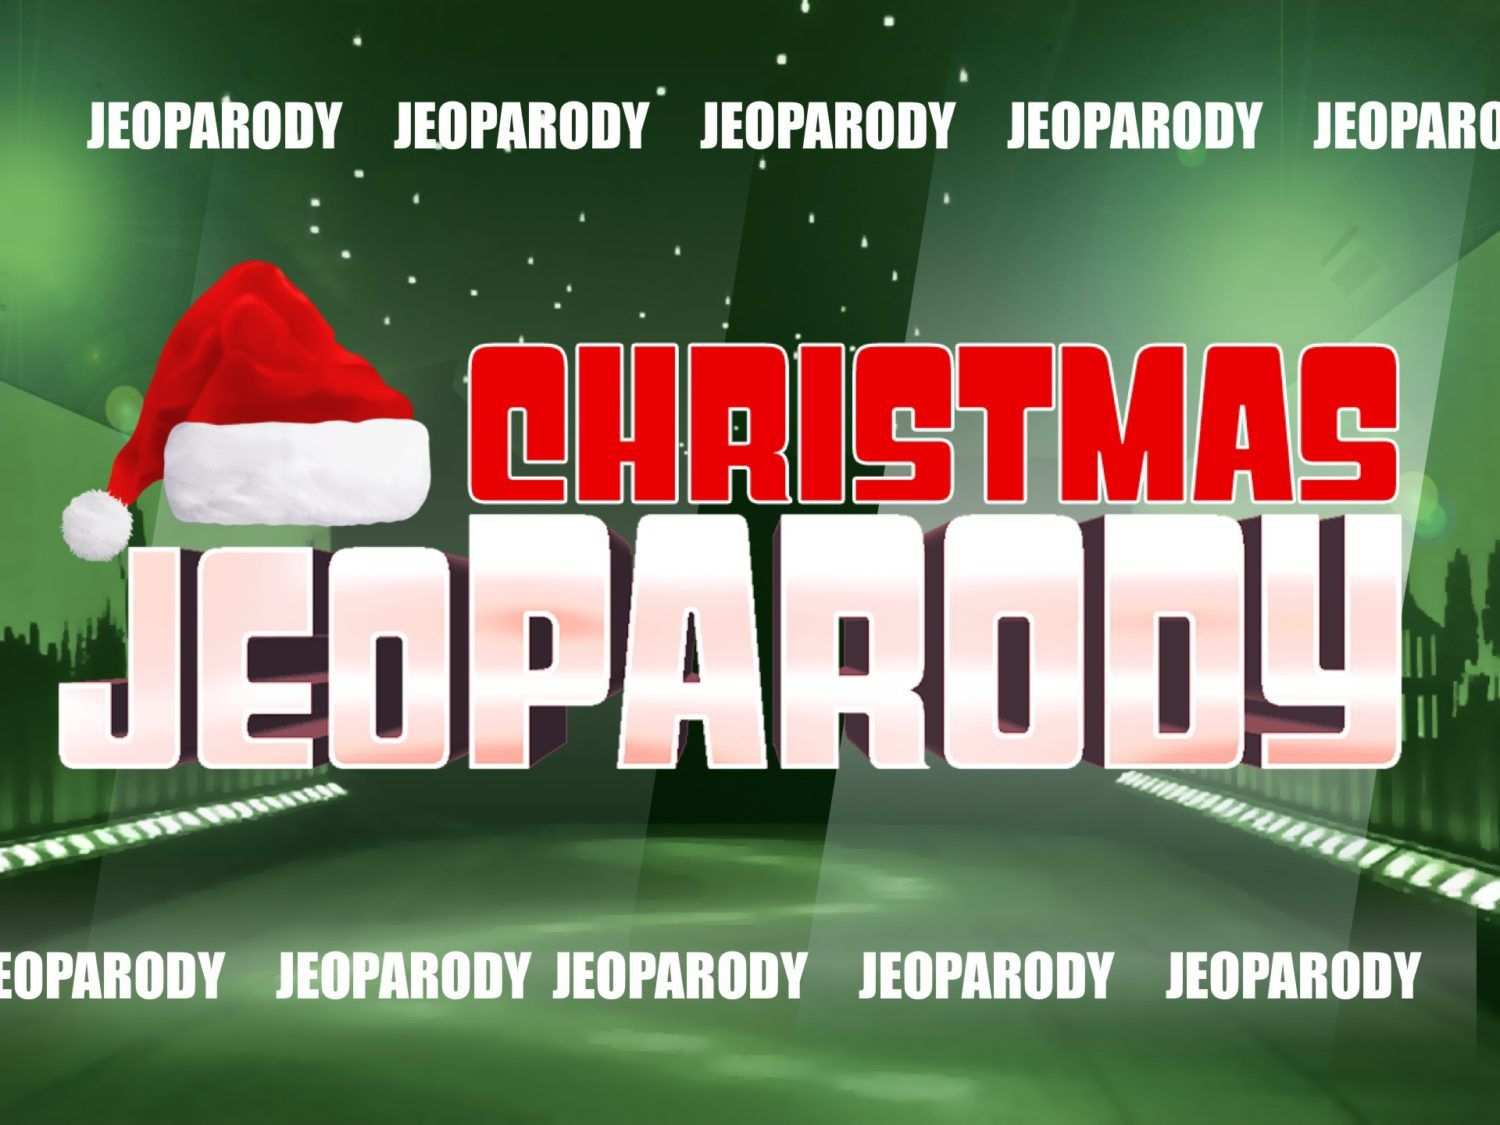 Brand New Christmas Jeopardy Powerpoint Game 30 Questions And Answers Christmas Jeopardy Jeopardy Powerpoint Template Christmas Games For Kids